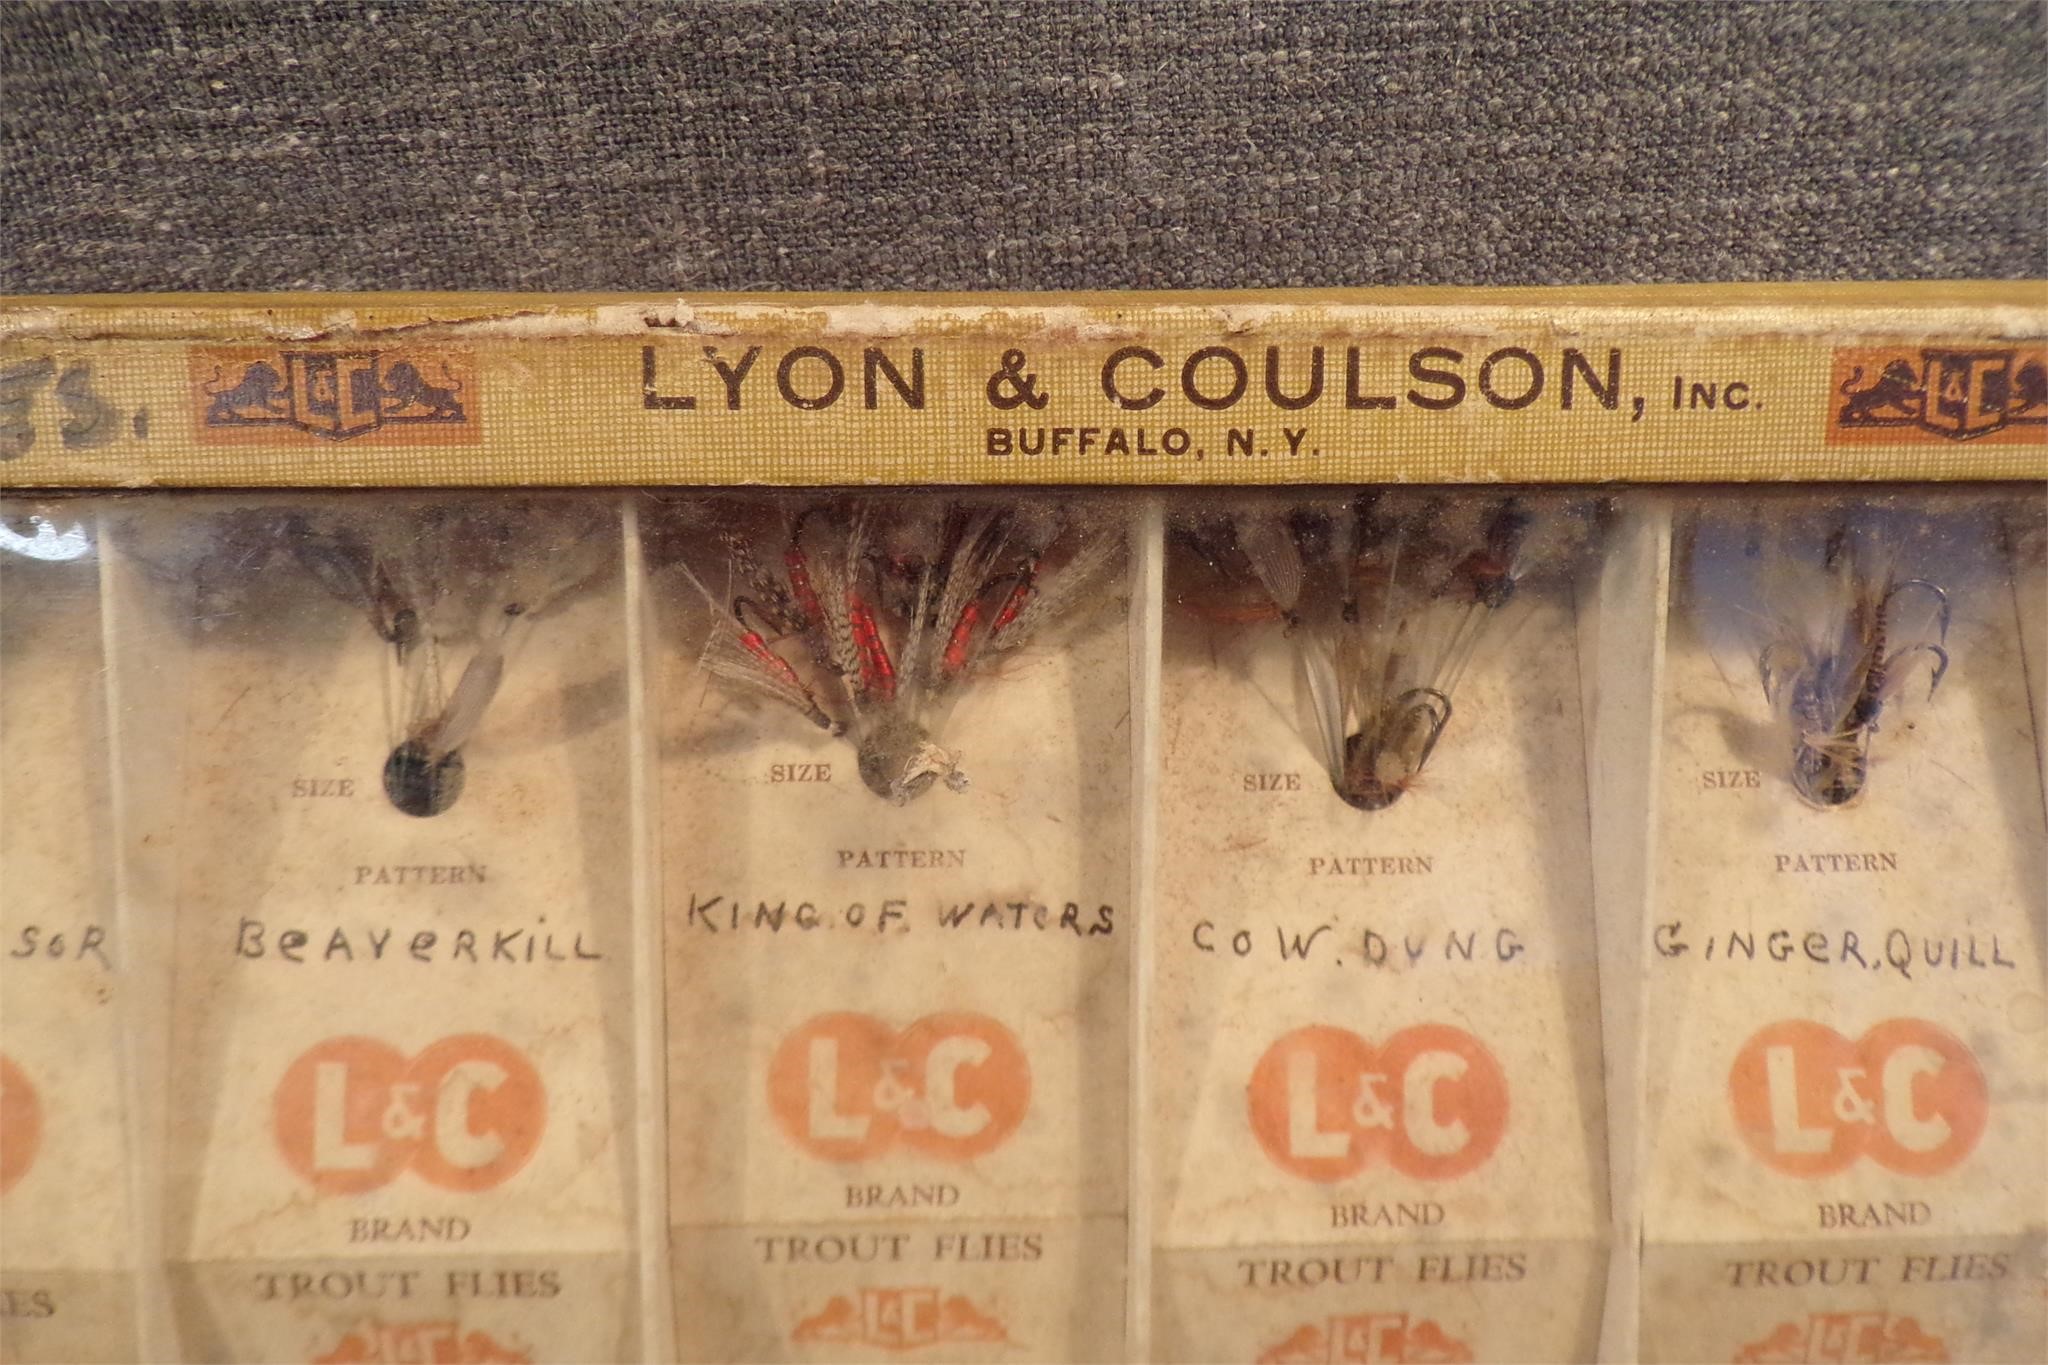 Antique Store Display Box of Lyon & Coulson Flies